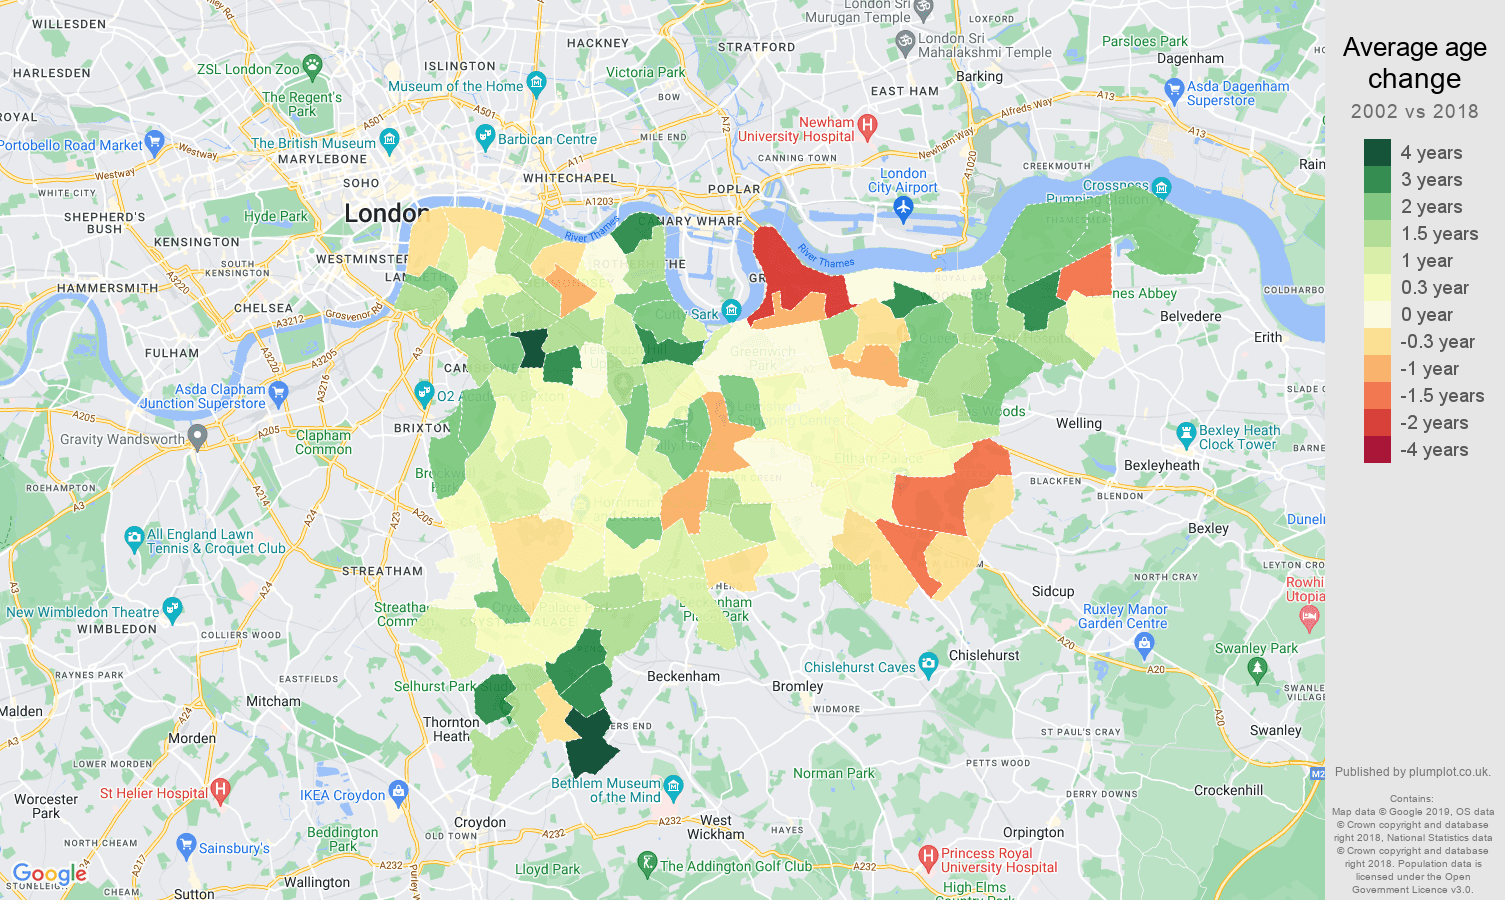 South East London average age change map